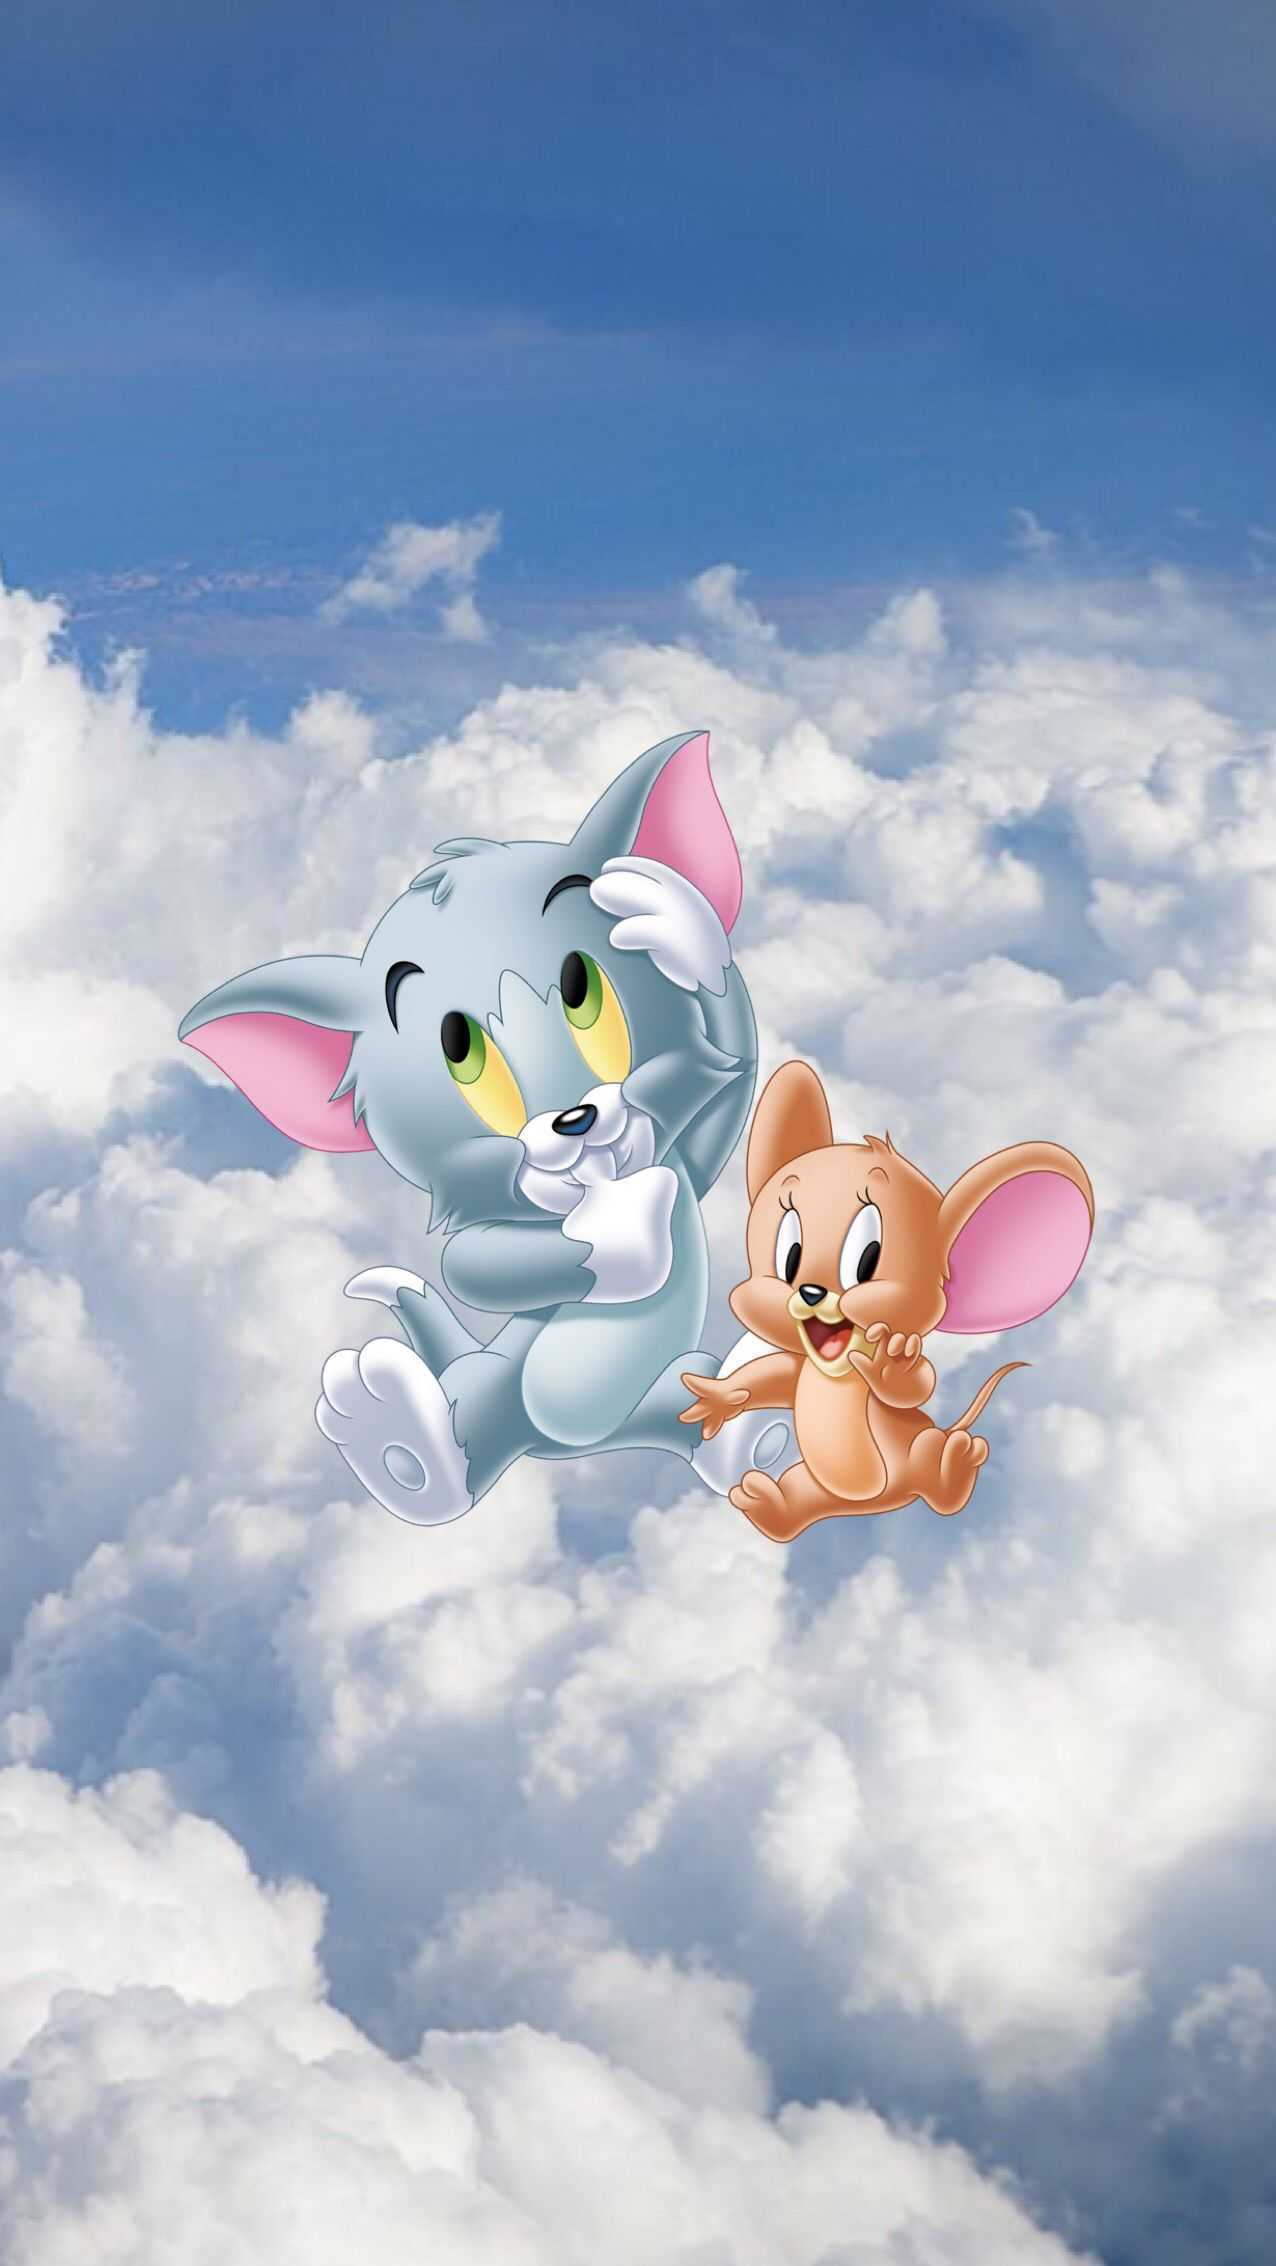 Tom and Jerry wallpaper for iPhone and Android - Tom and Jerry